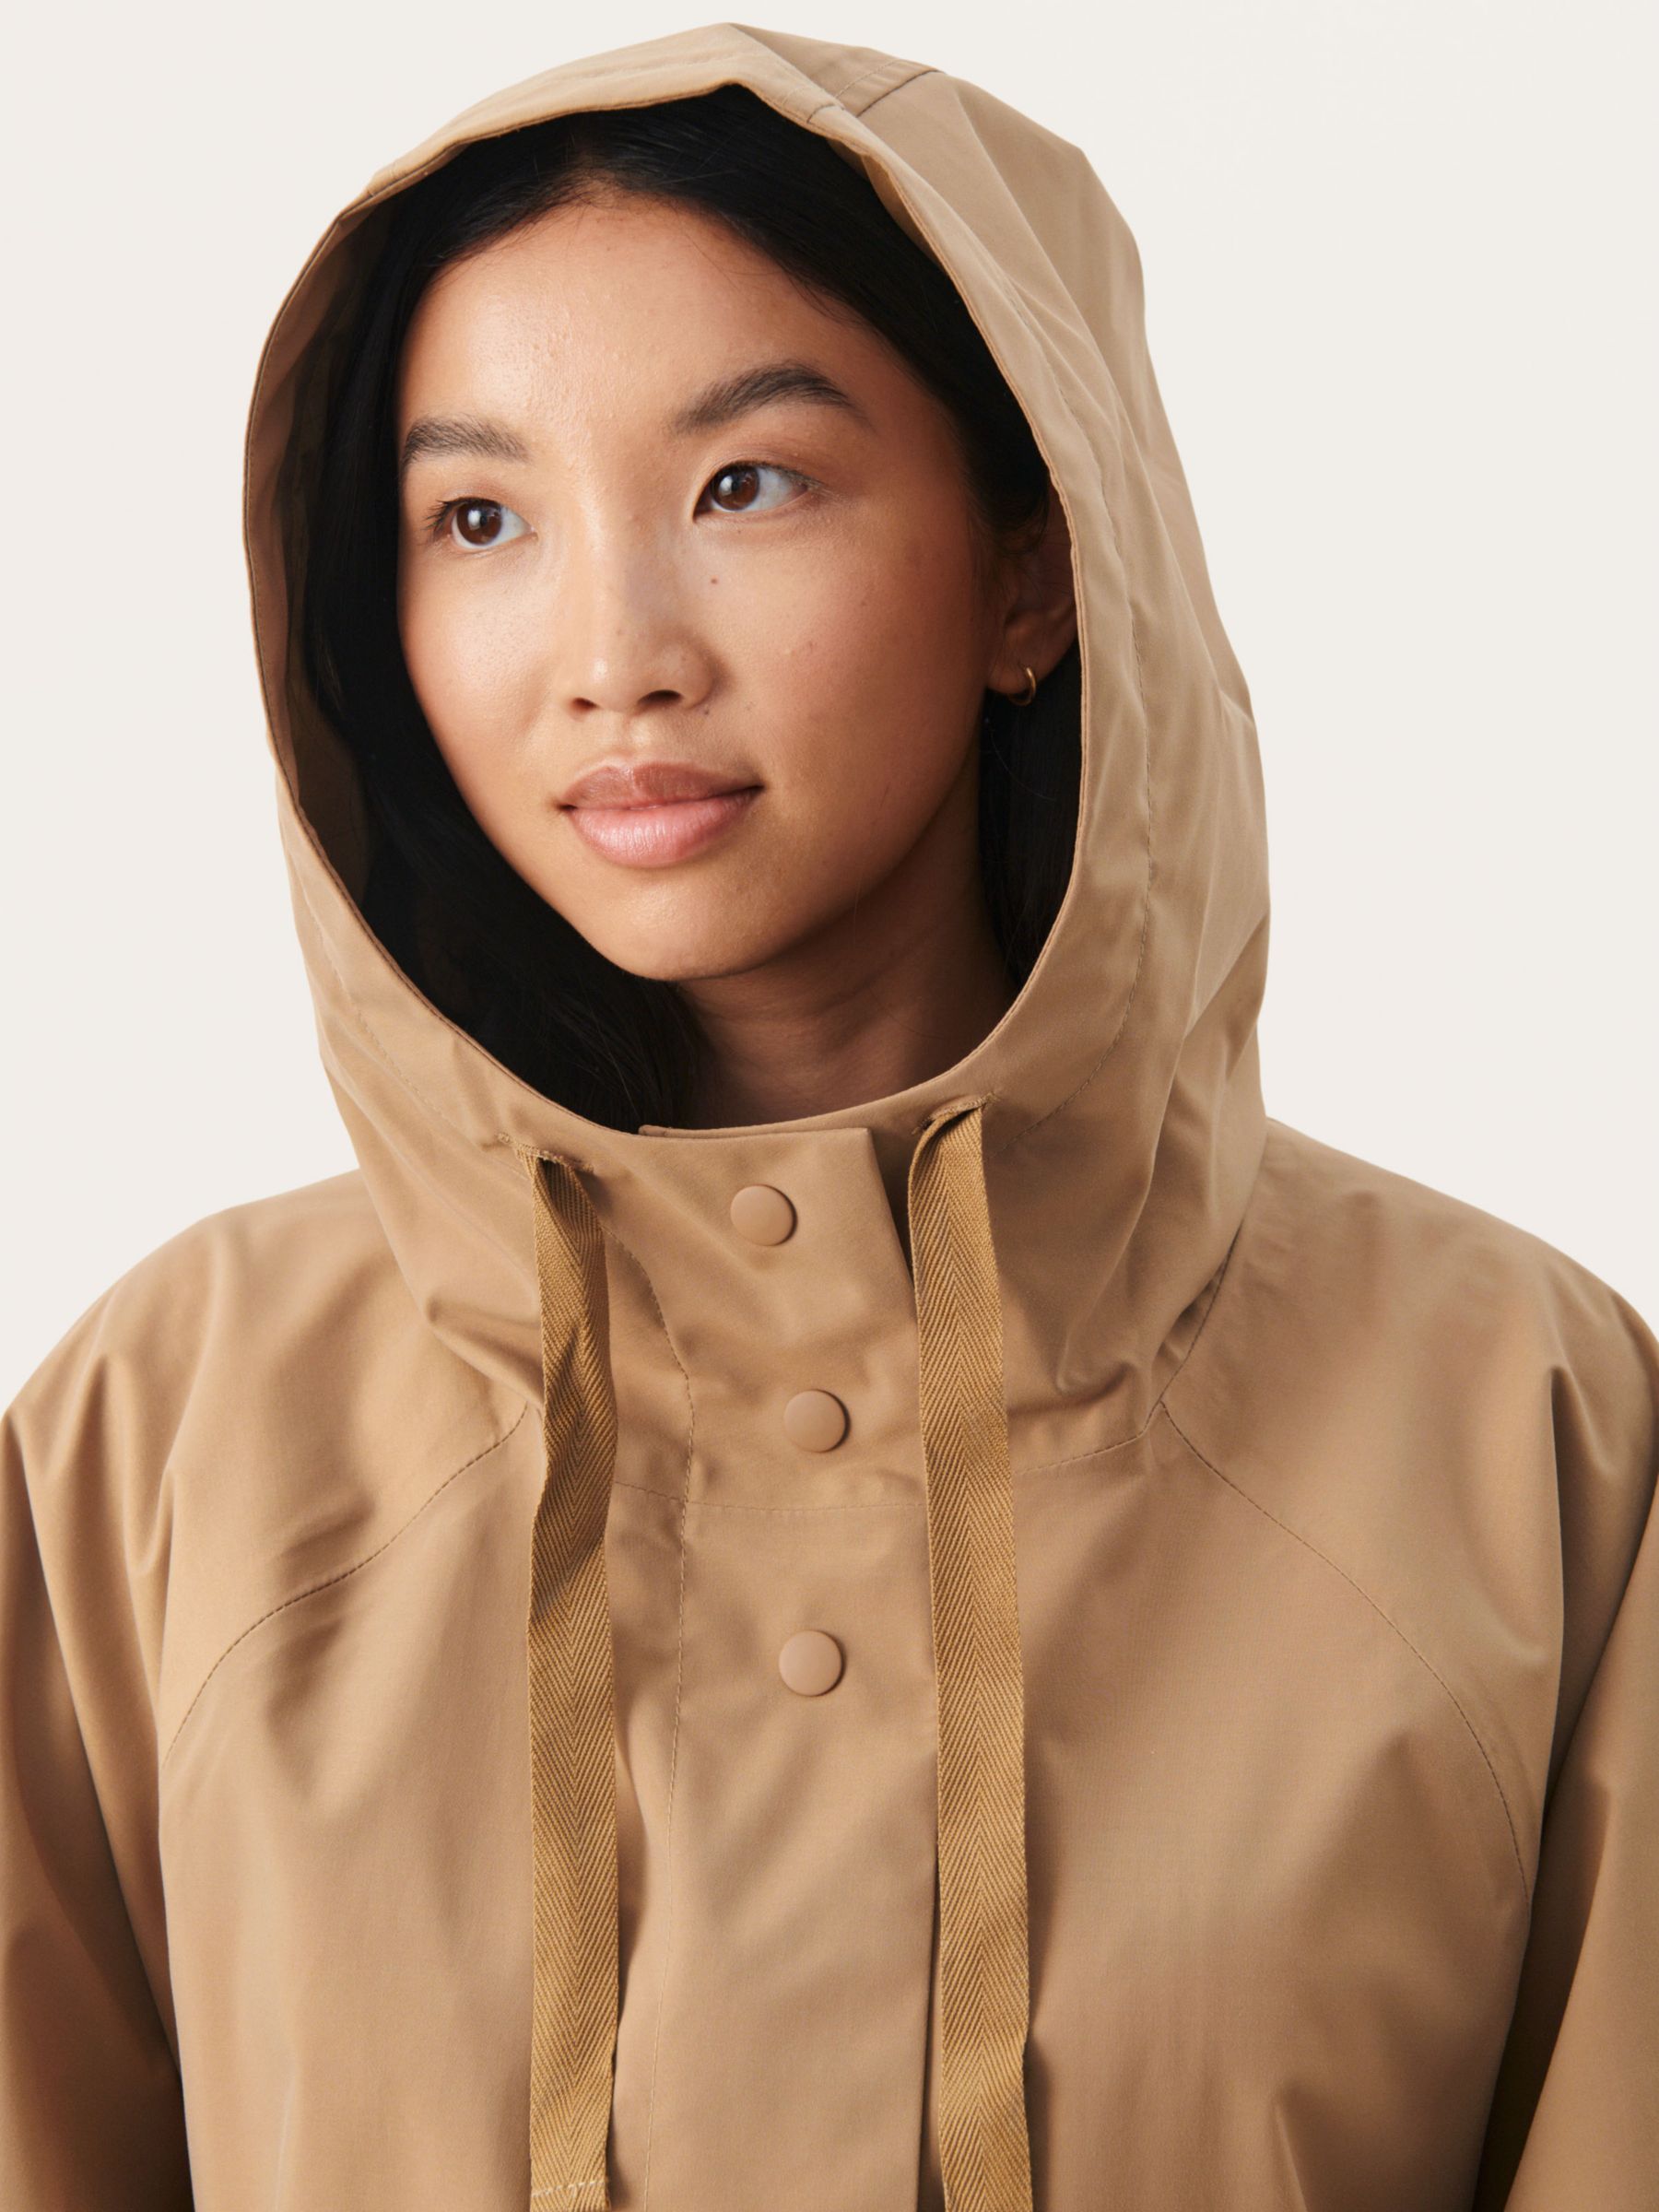 Buy Part Two Emmy Hooded Relaxed Fit Coat Online at johnlewis.com